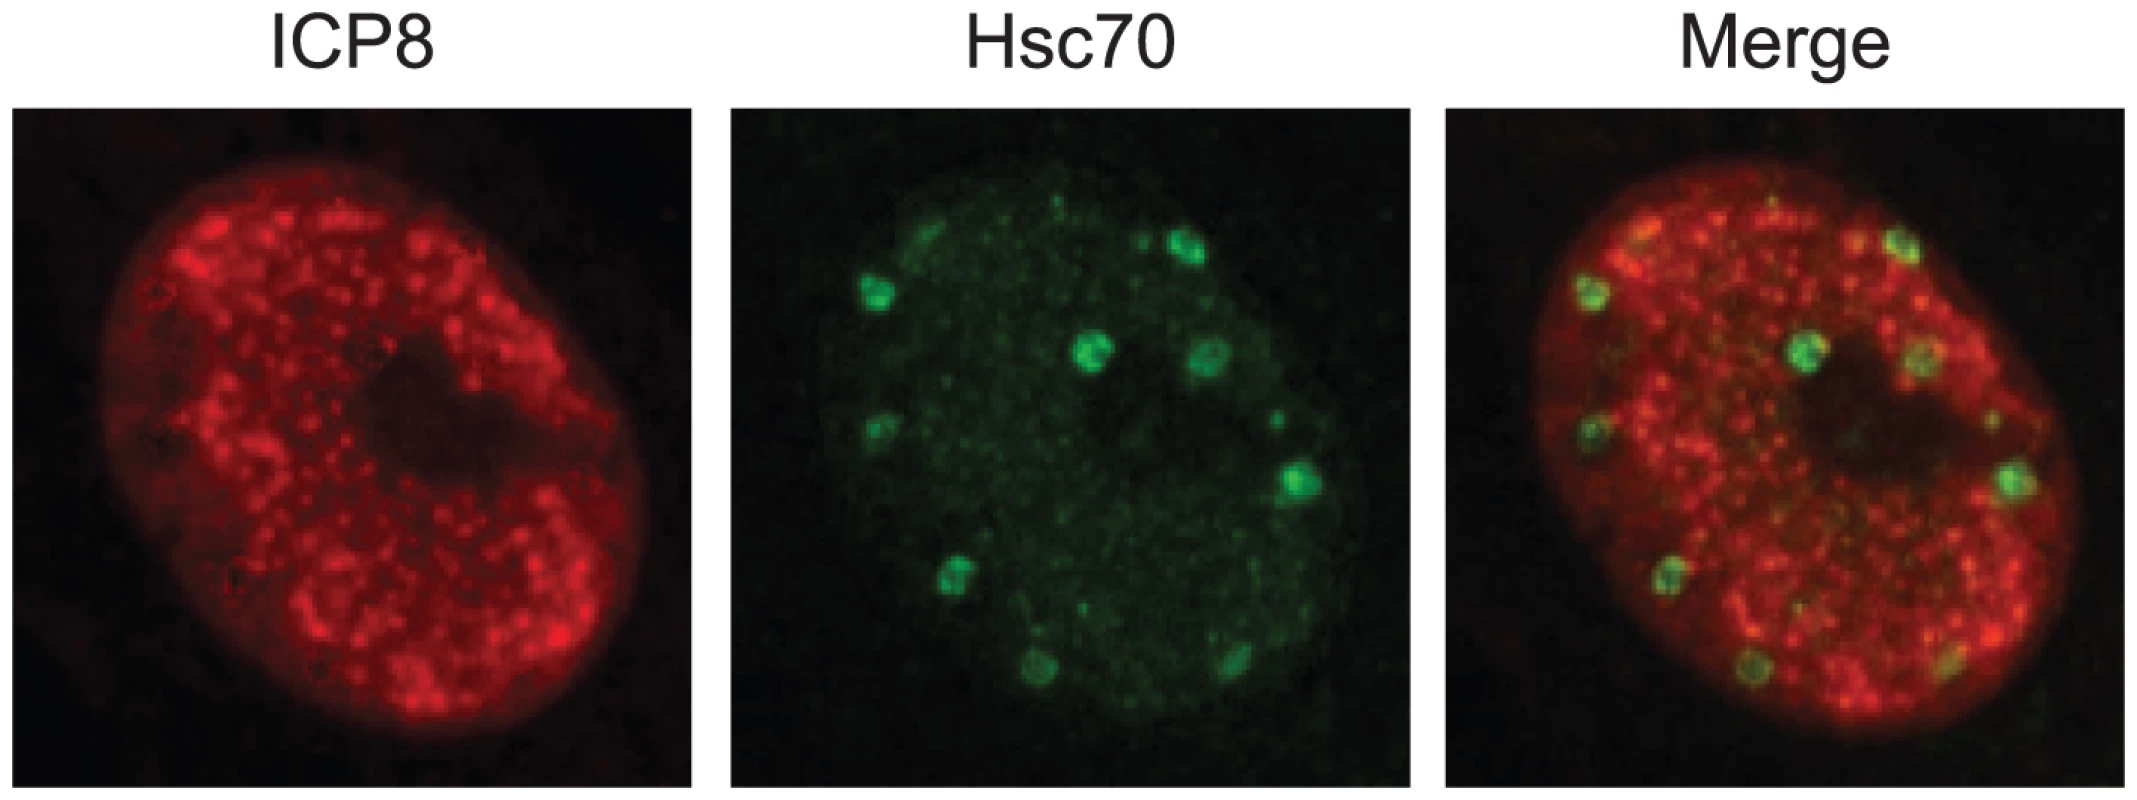 Hsc70 is detected in virus-induced chaperone-enriched (VICE) domains that form adjacent to replication compartments in HSV-1-infected cells.